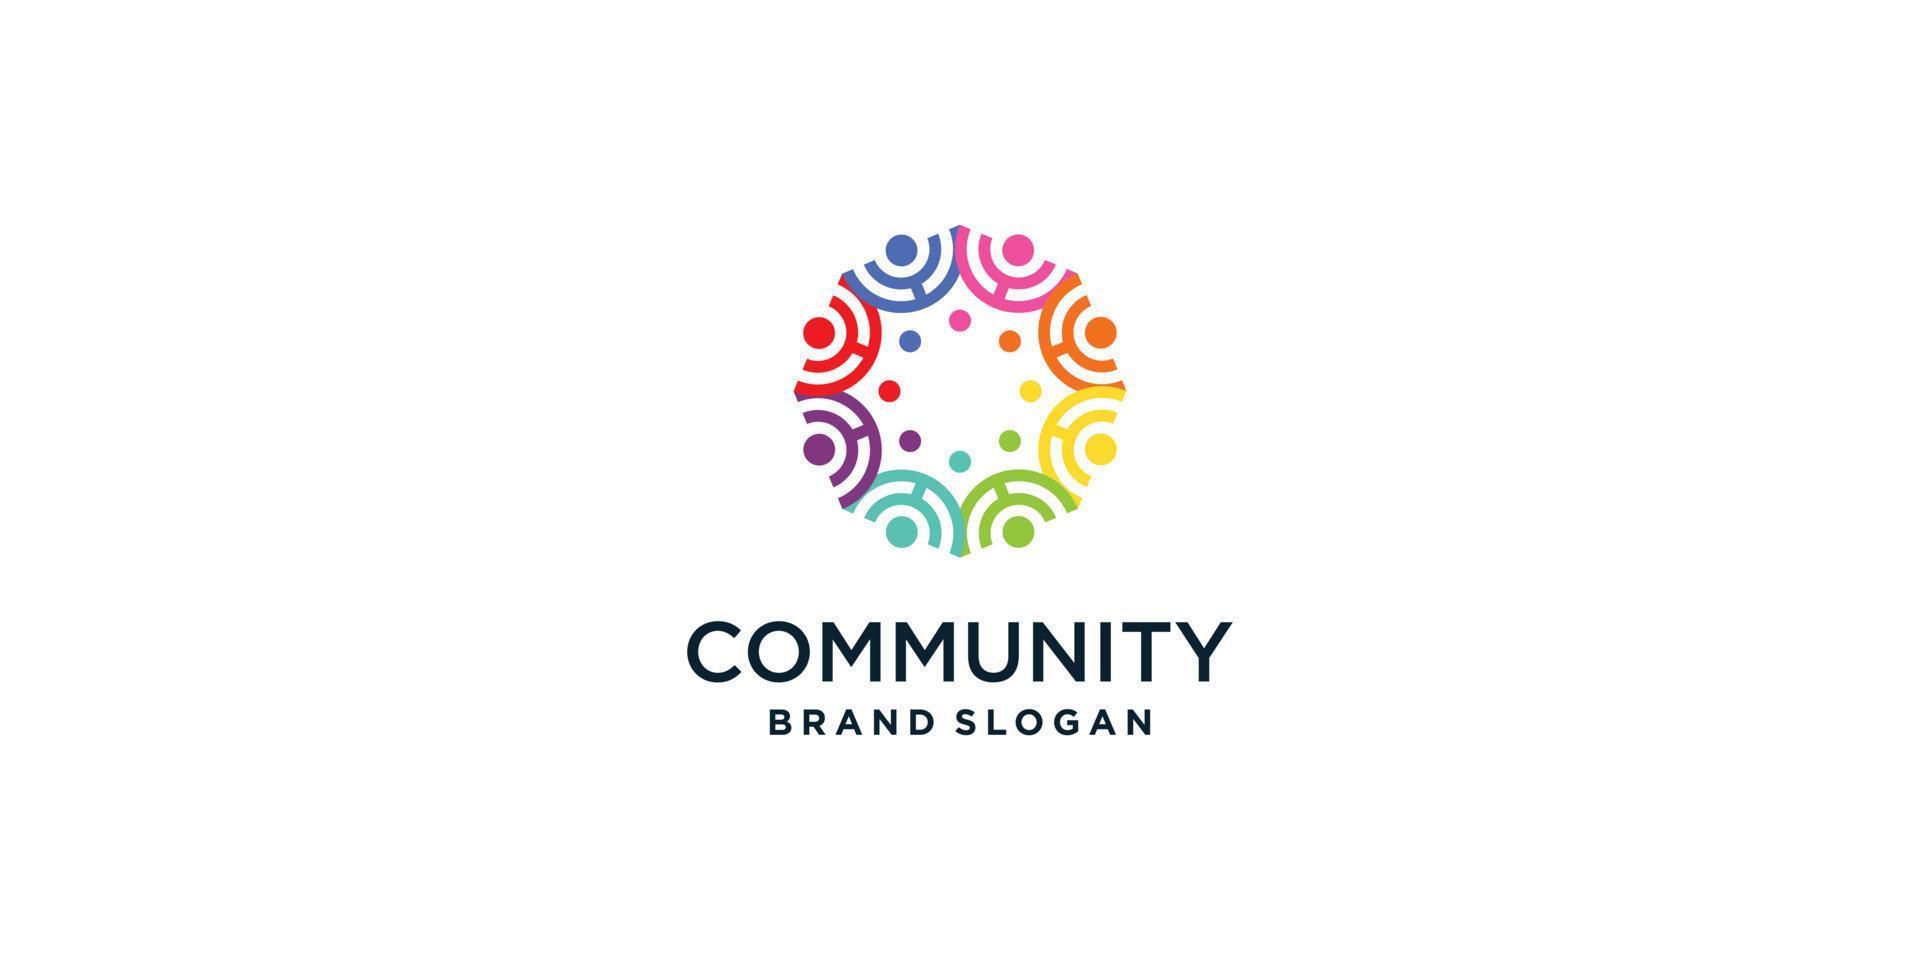 Community and team work logo abstract Premium Vector part 4